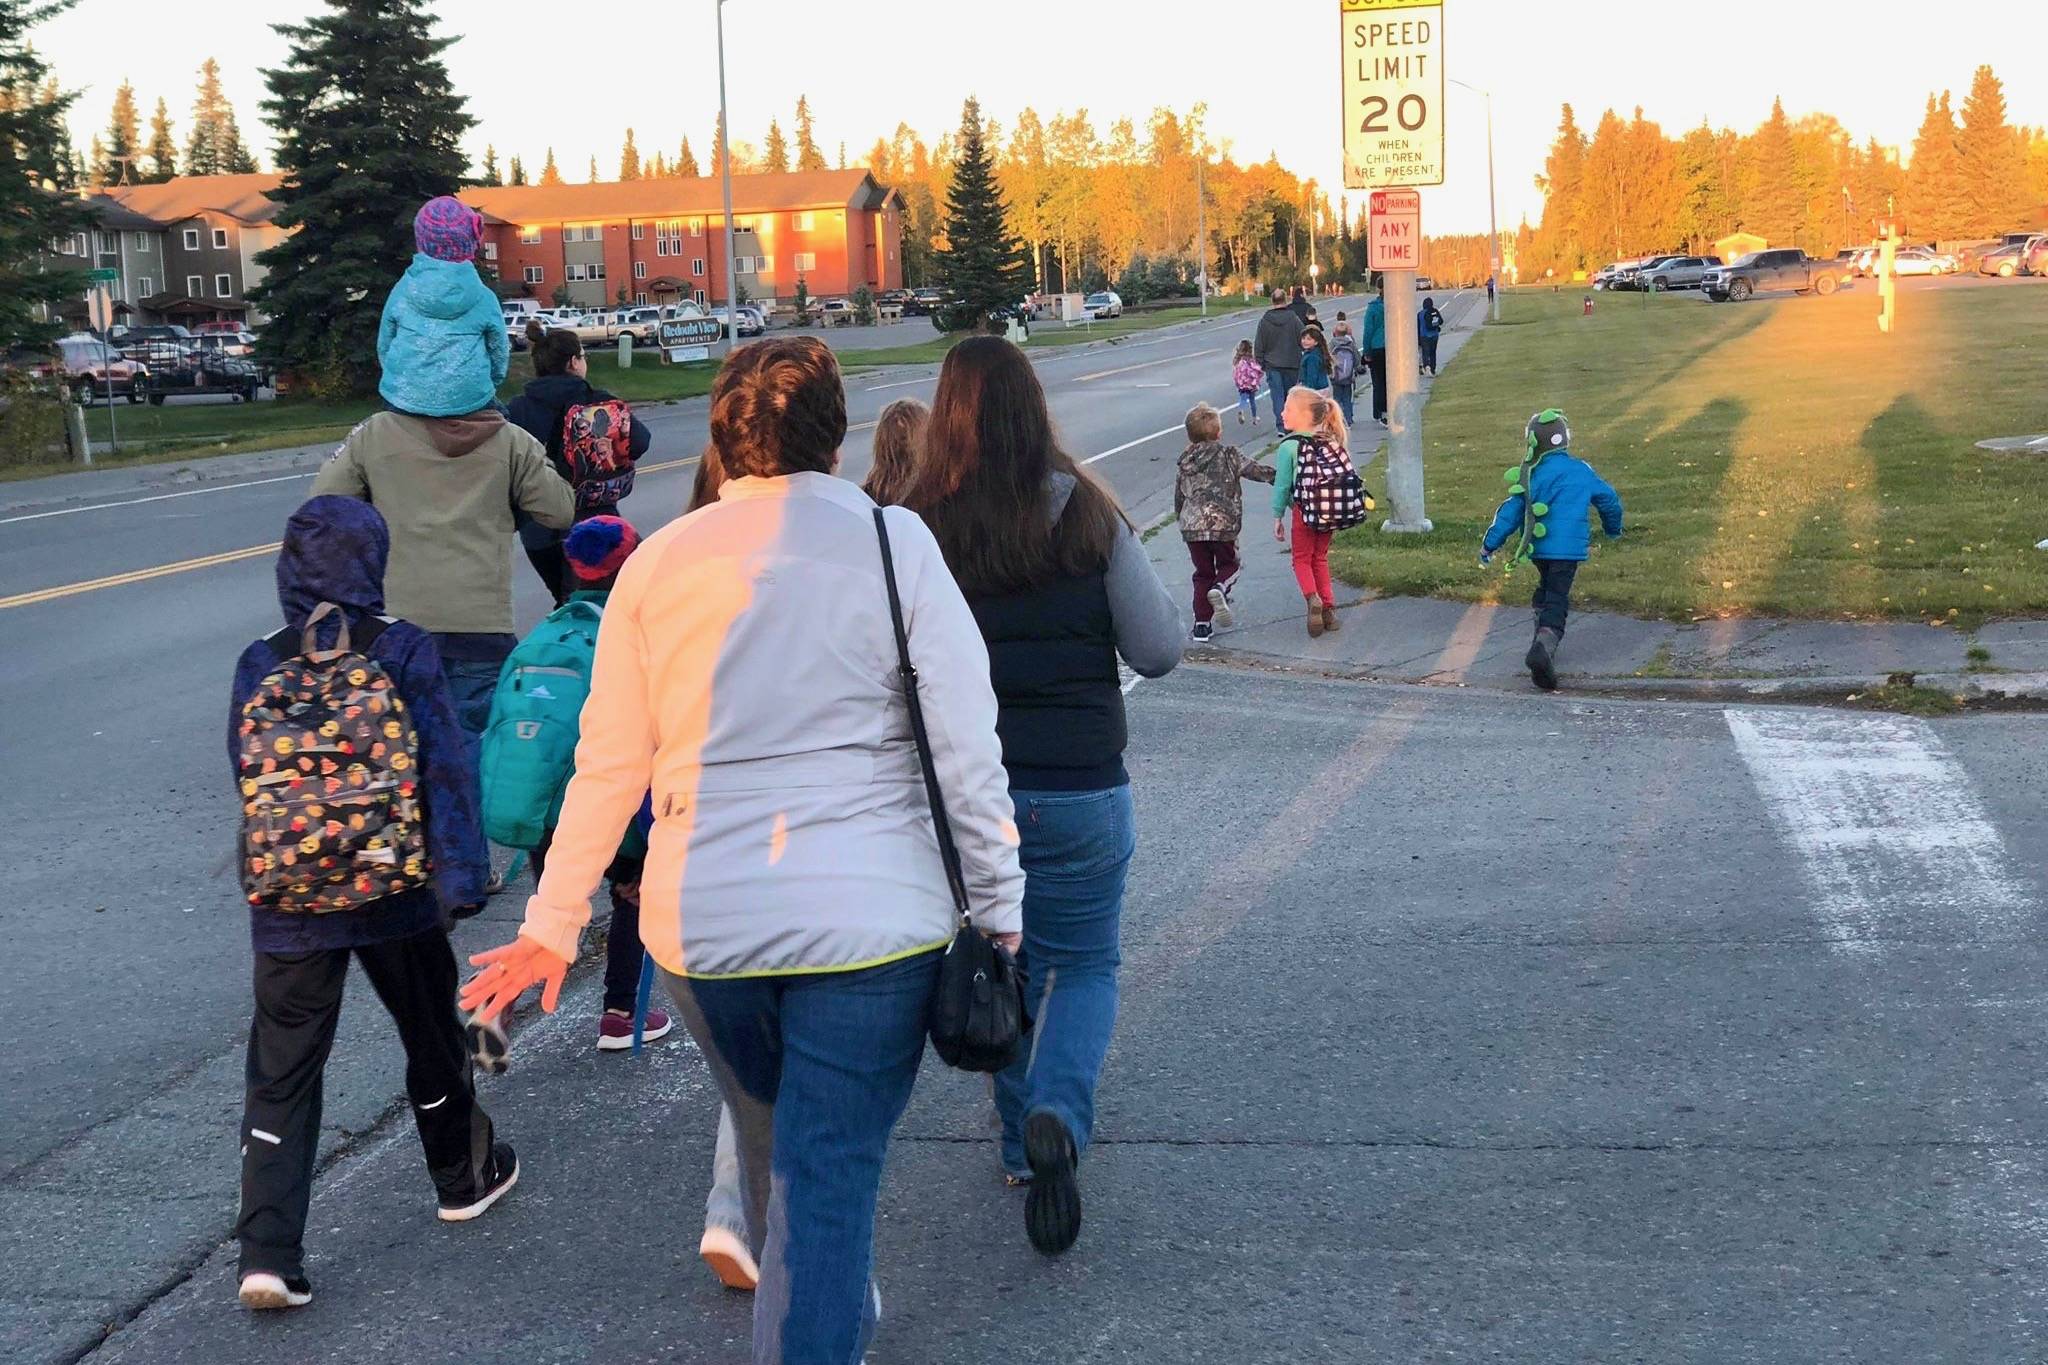 Students and parents safely cross the street on their way to school for Walk to School Day, on Tuesday, Sept. 25, 2018, in Soldotna, Alaska. (Photo by Victoria Petersen/Peninsula Clarion)